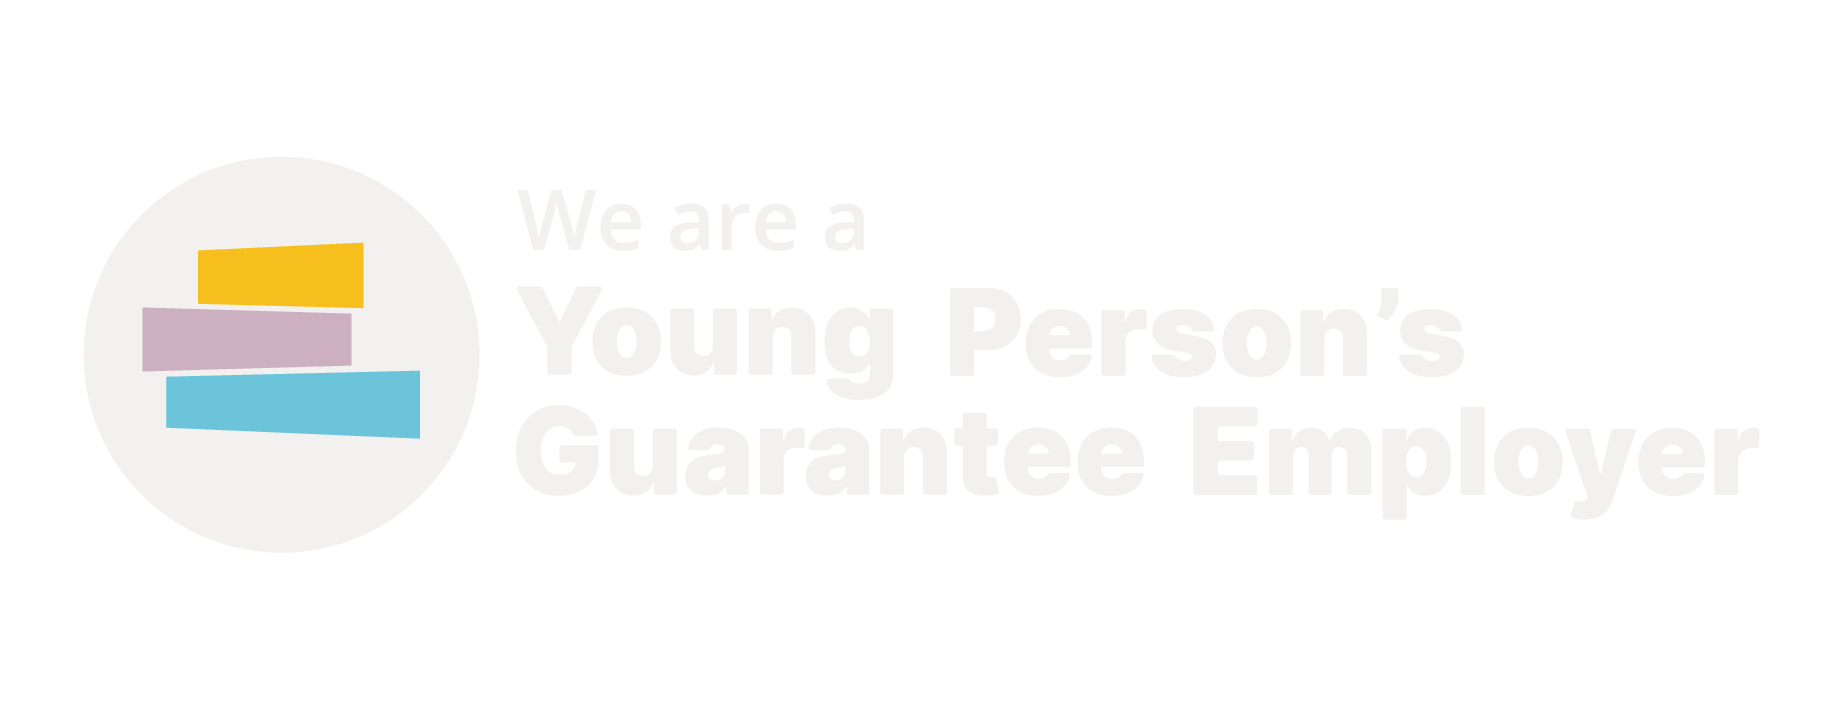 Young Person’s Guarantee